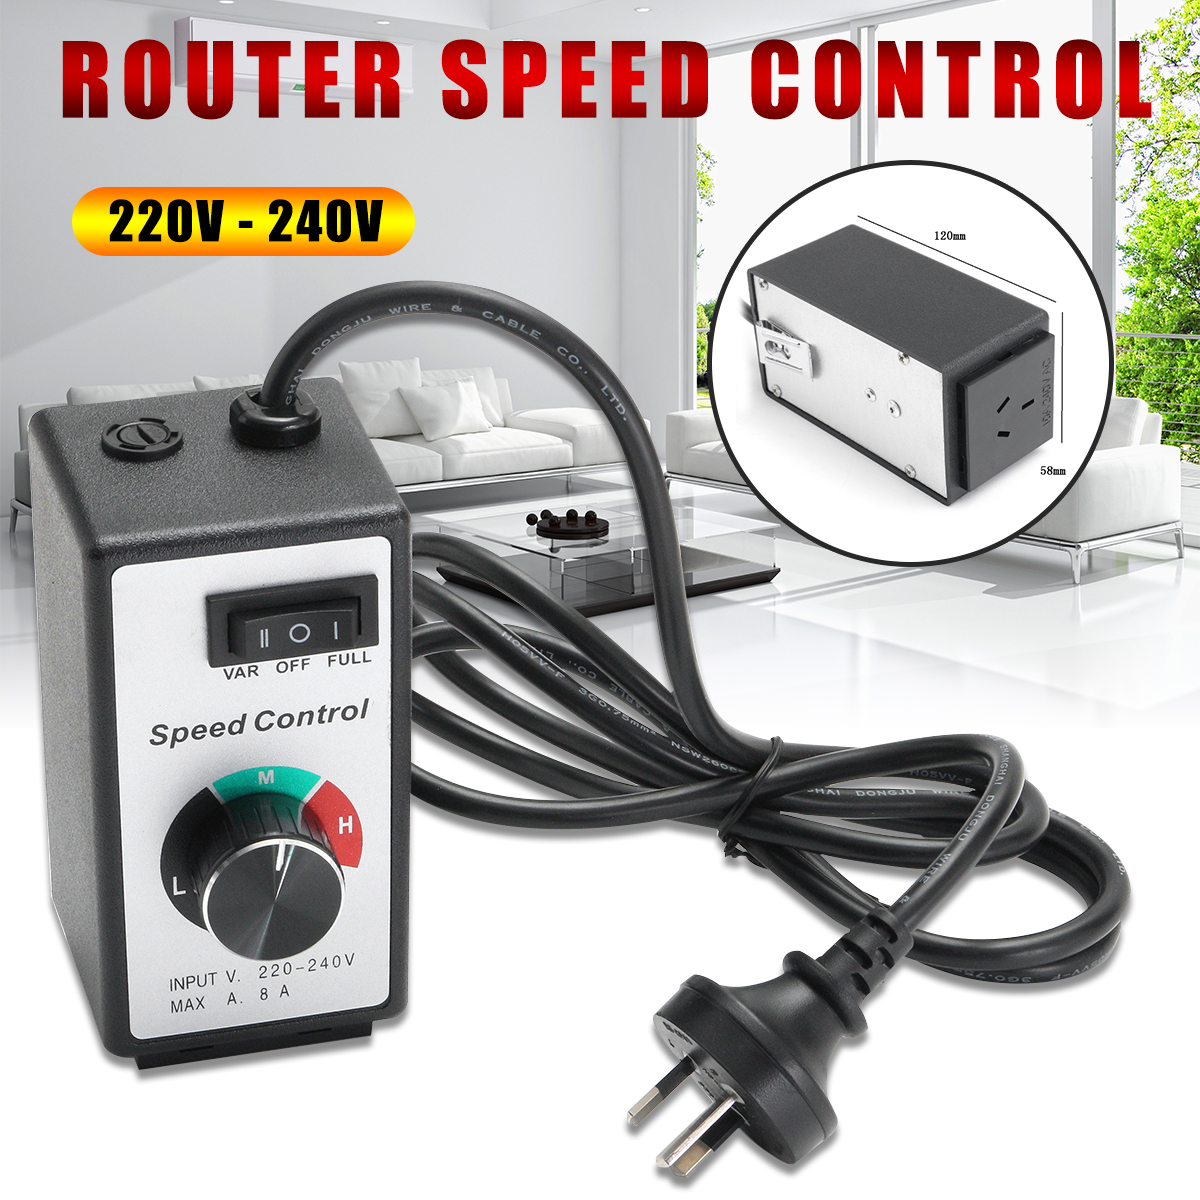 220V - 240V 8A Router Speed Control Variable Controller Motor AC Rheostat Tool For Lighting Fans Power Tools